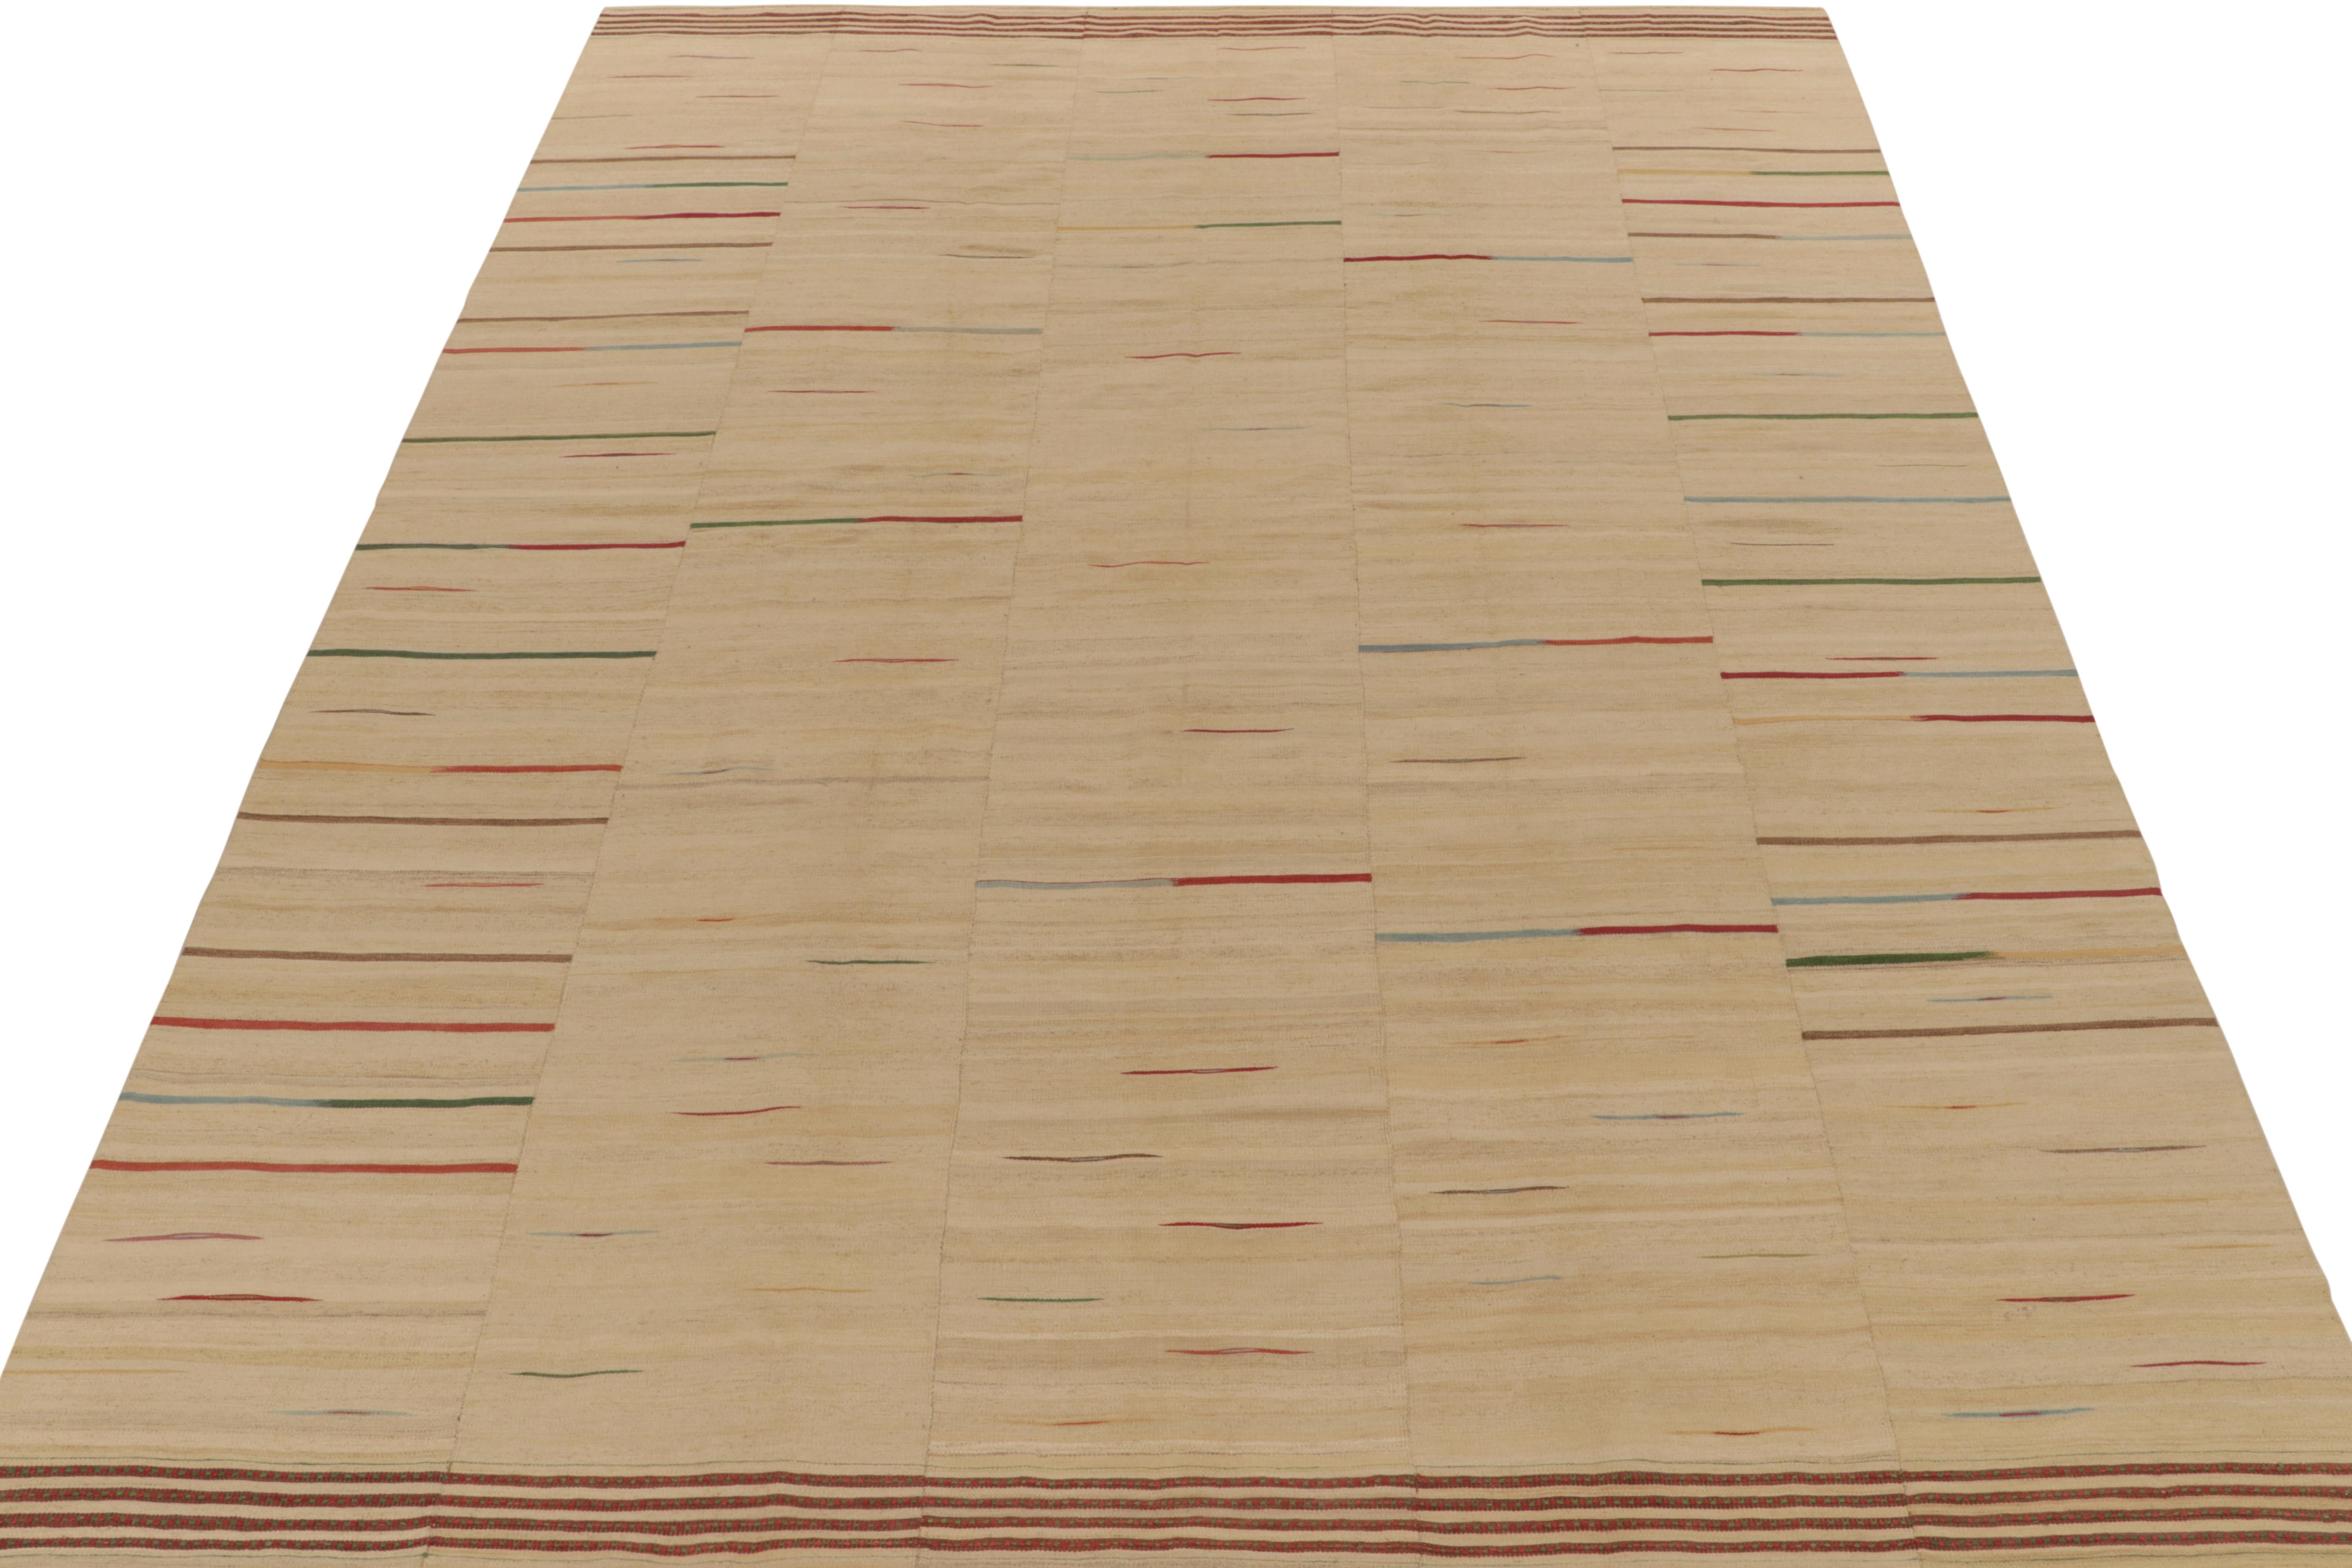 Persian Handwoven Vintage Paneled Kilim in Beige-Brown with Colorful Accent Stripes For Sale